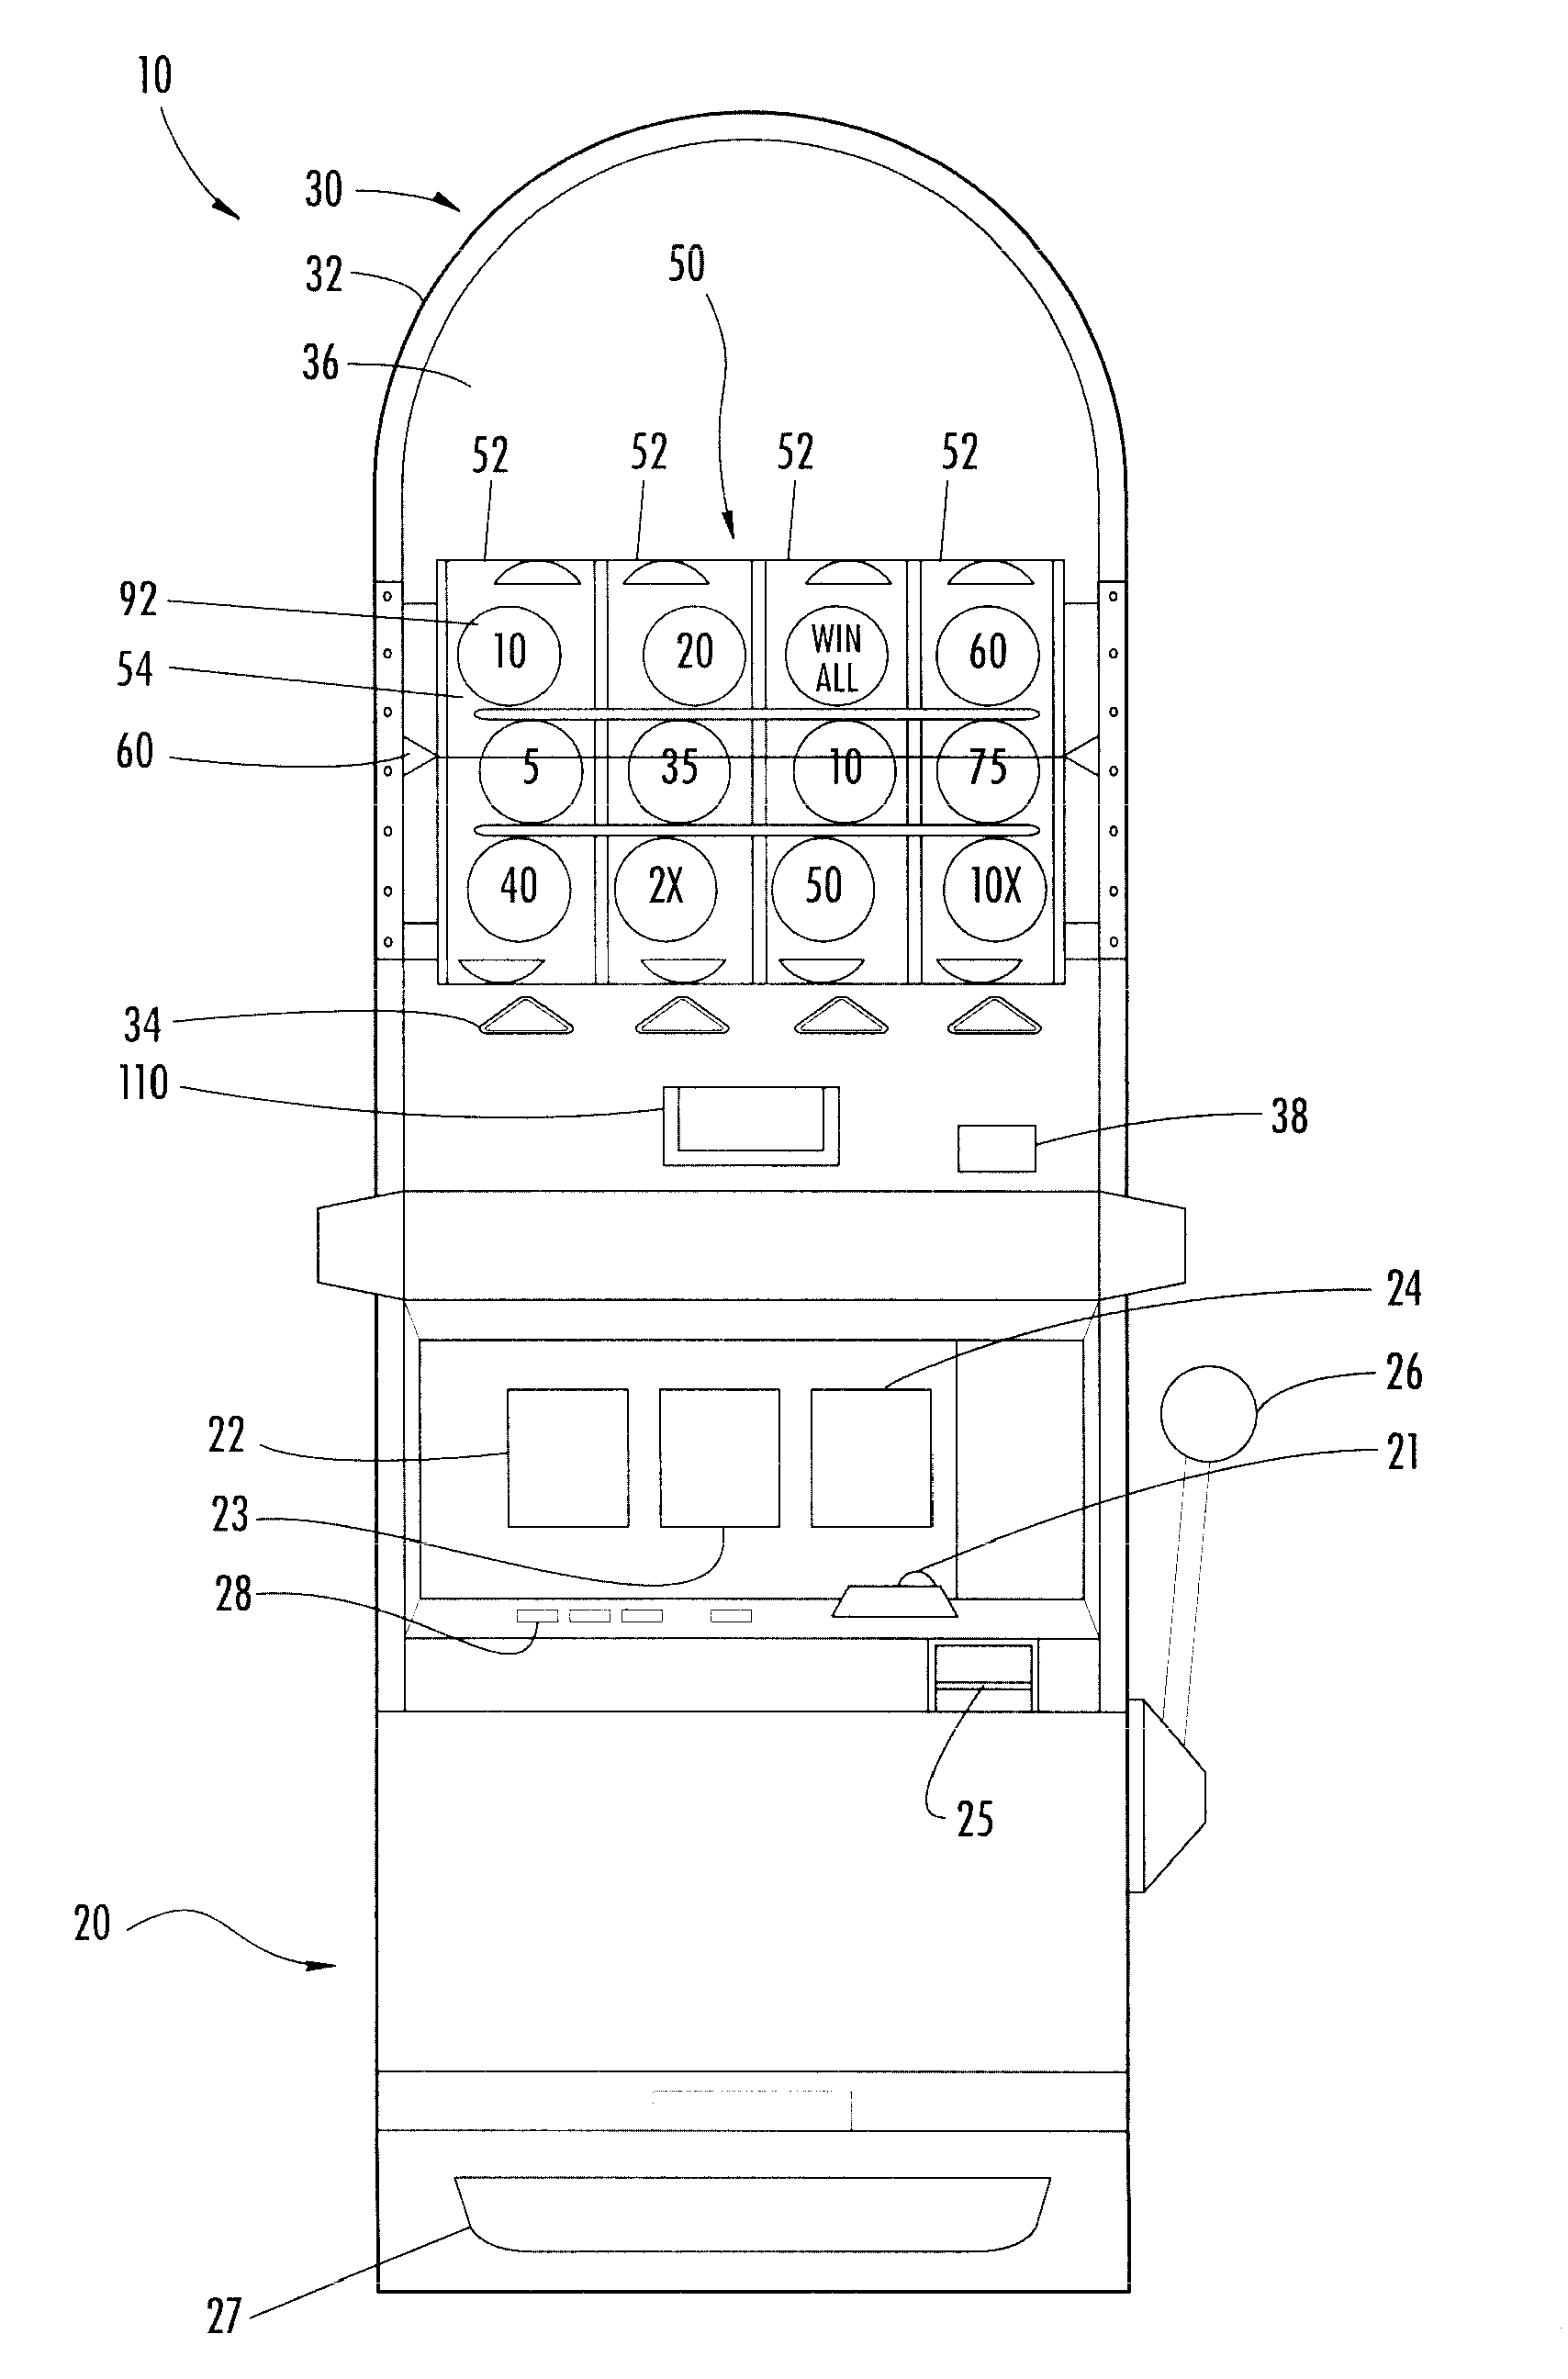 Gaming device and method of use